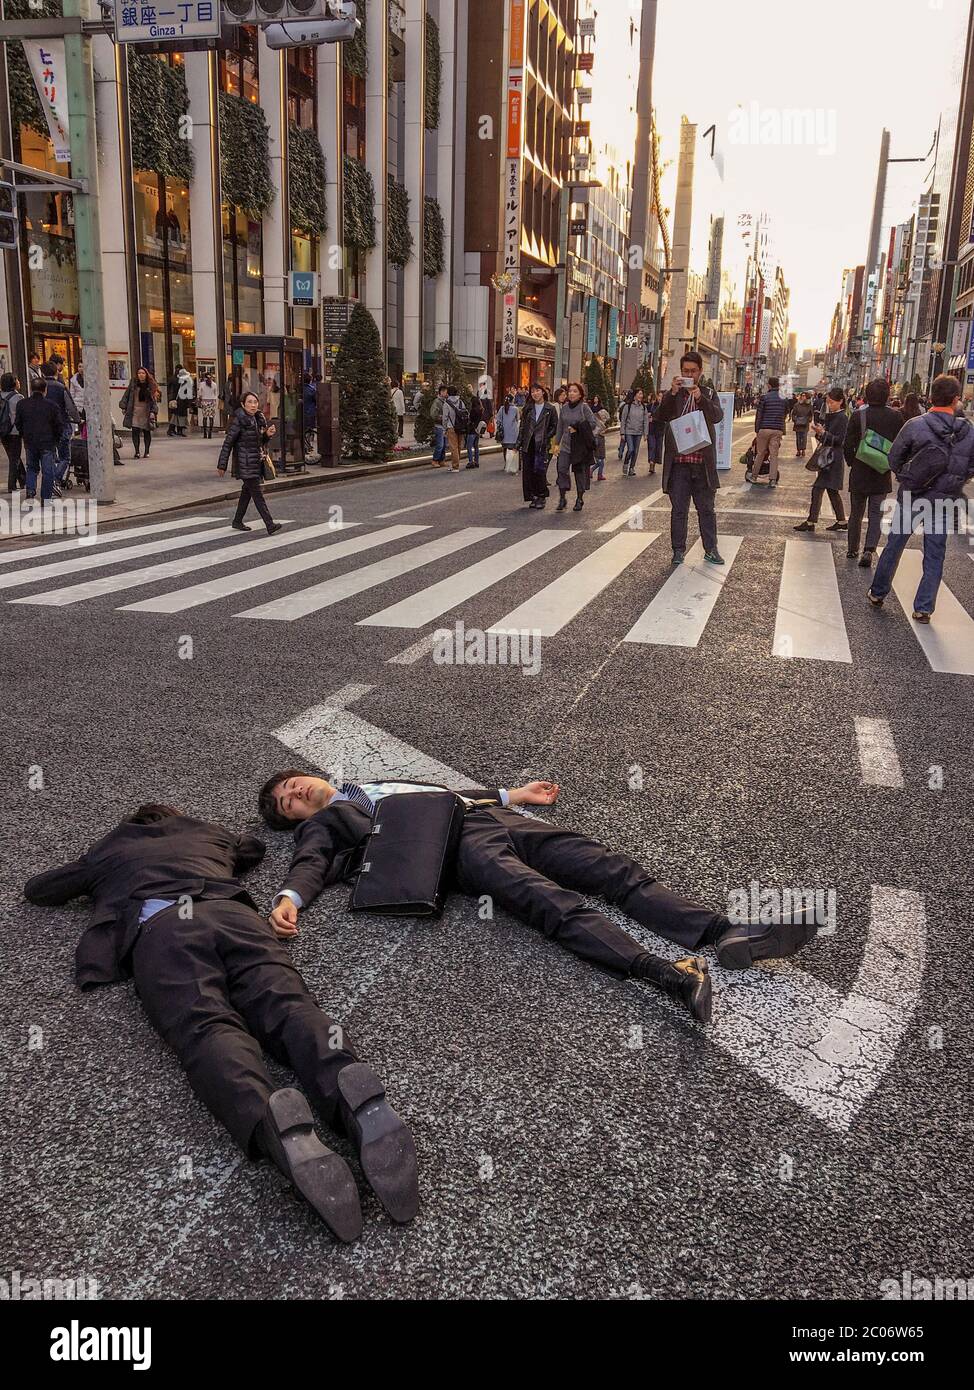 Two Men in Business Suits Lying on a Road at Ginza Tokyo Stock Photo